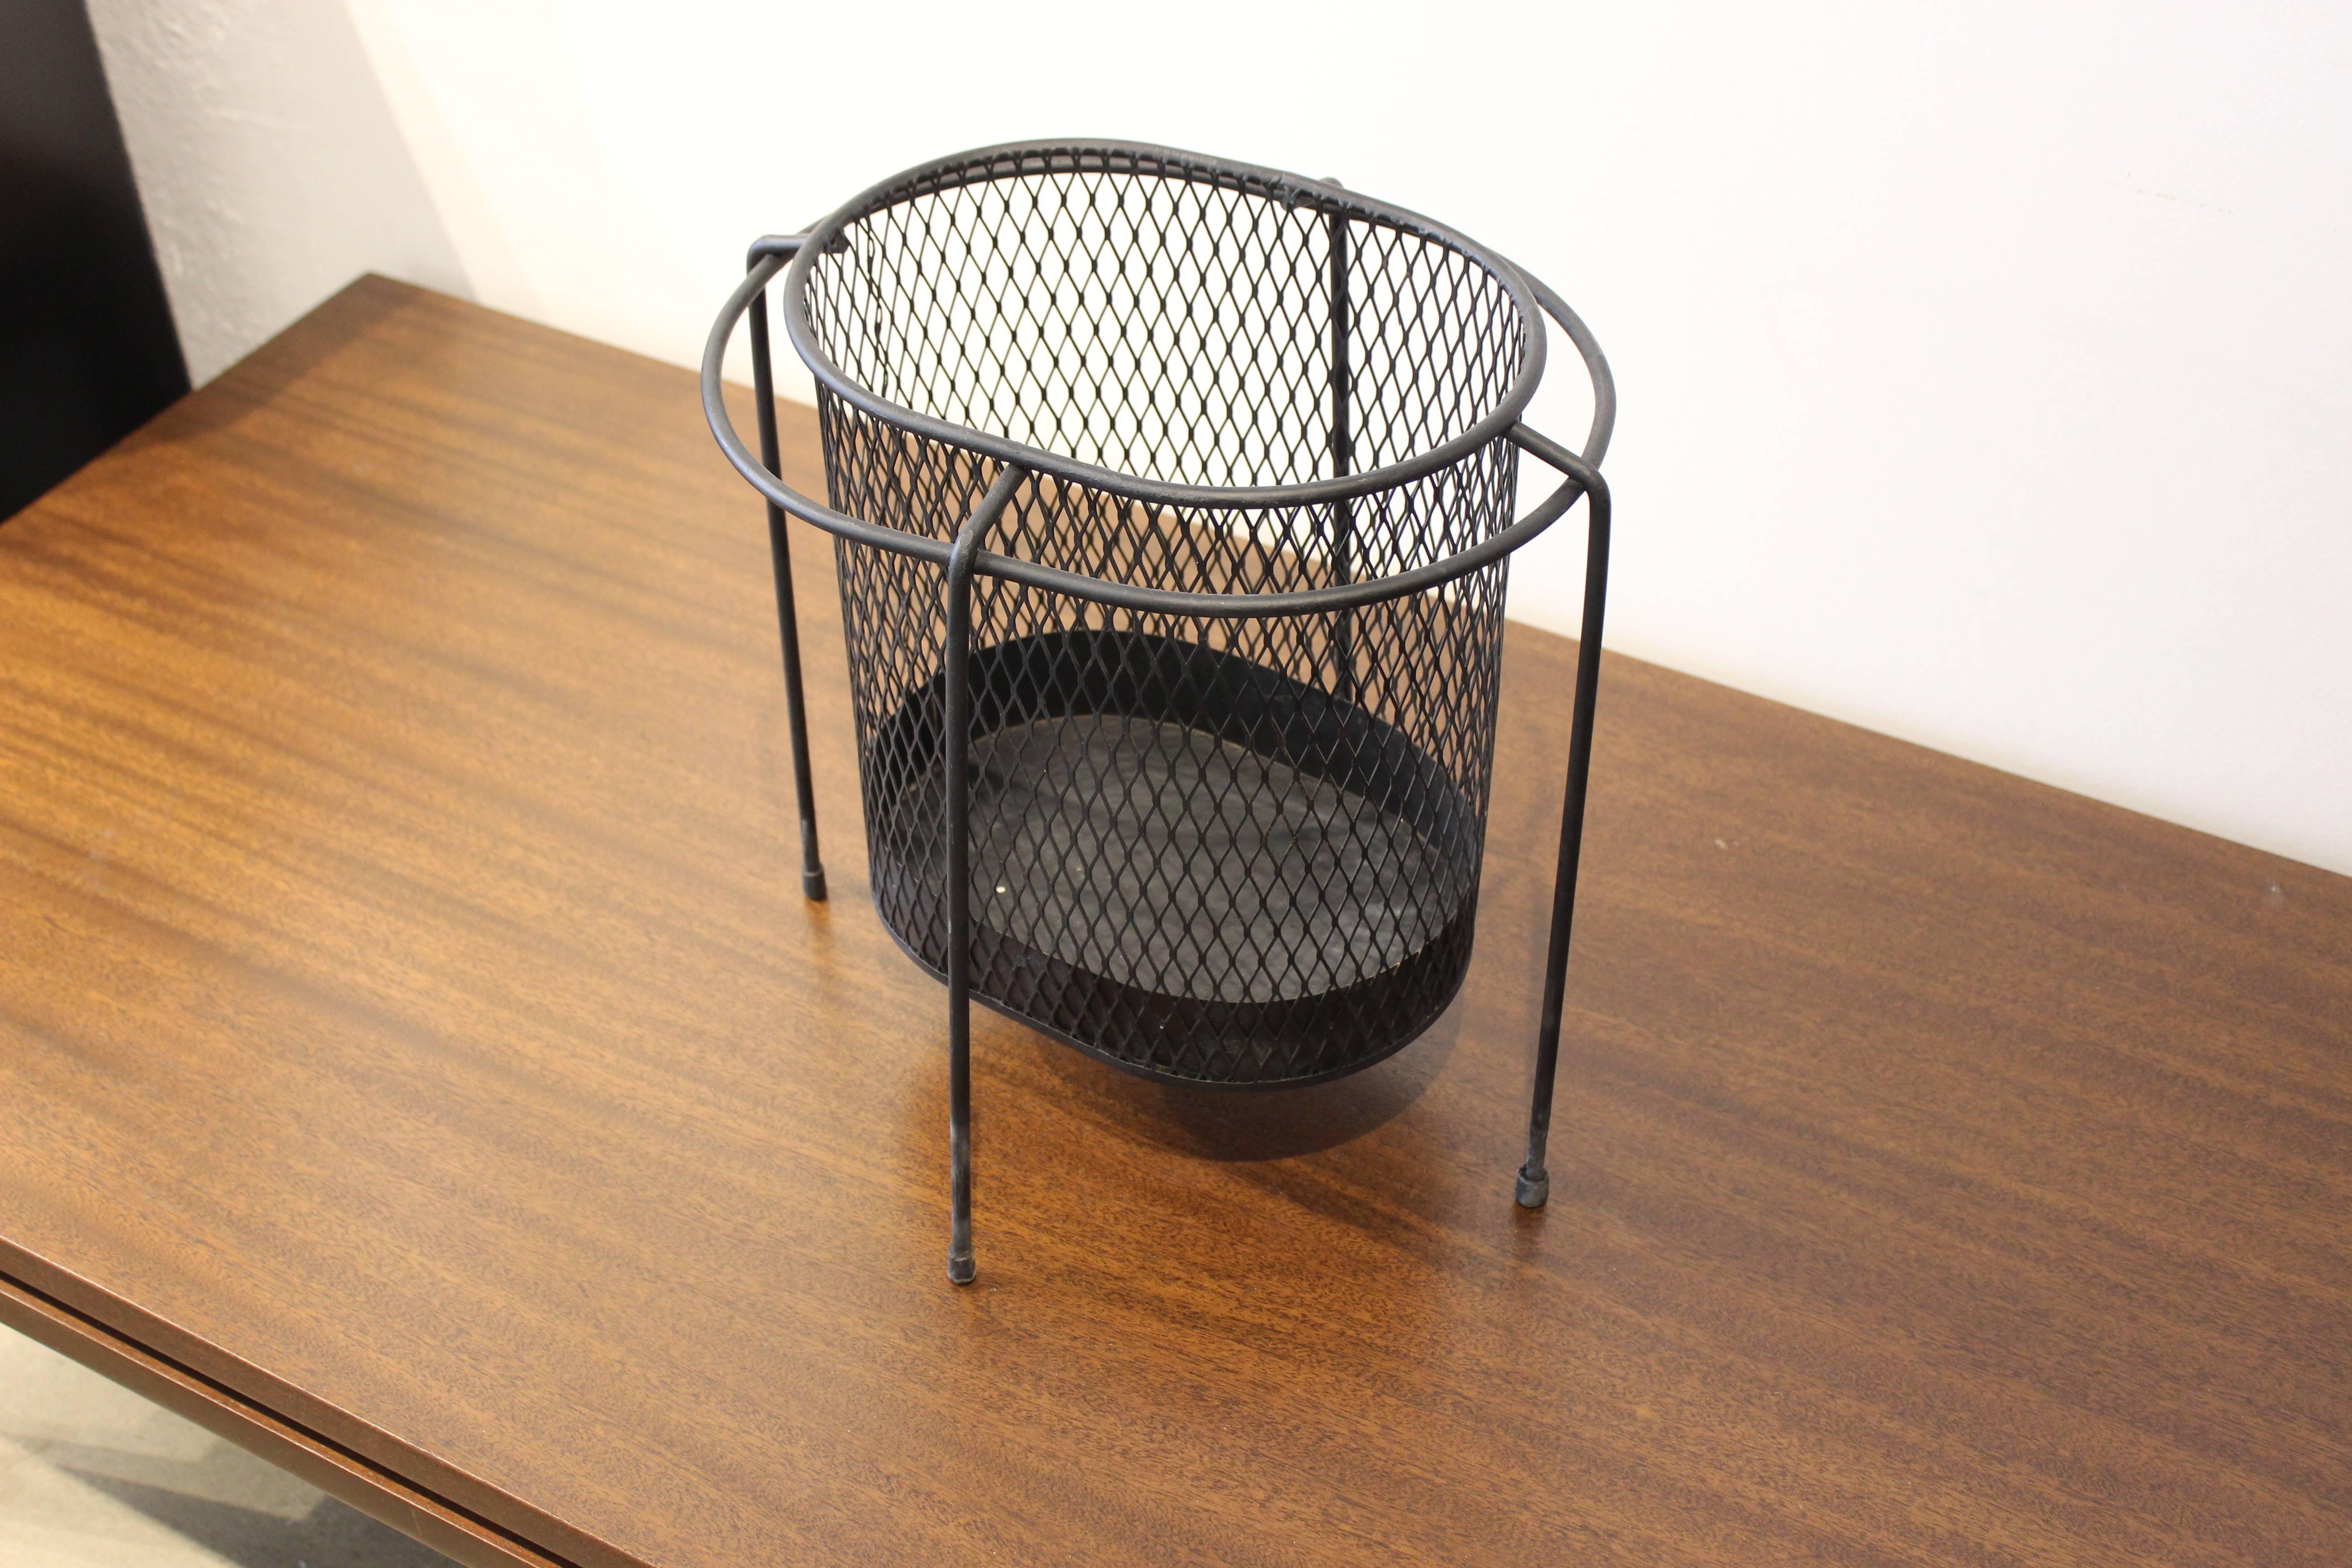 Mid-Century Modern Sculptural Iron and Wire Waste Basket, France, Style of Mategot, 1950s